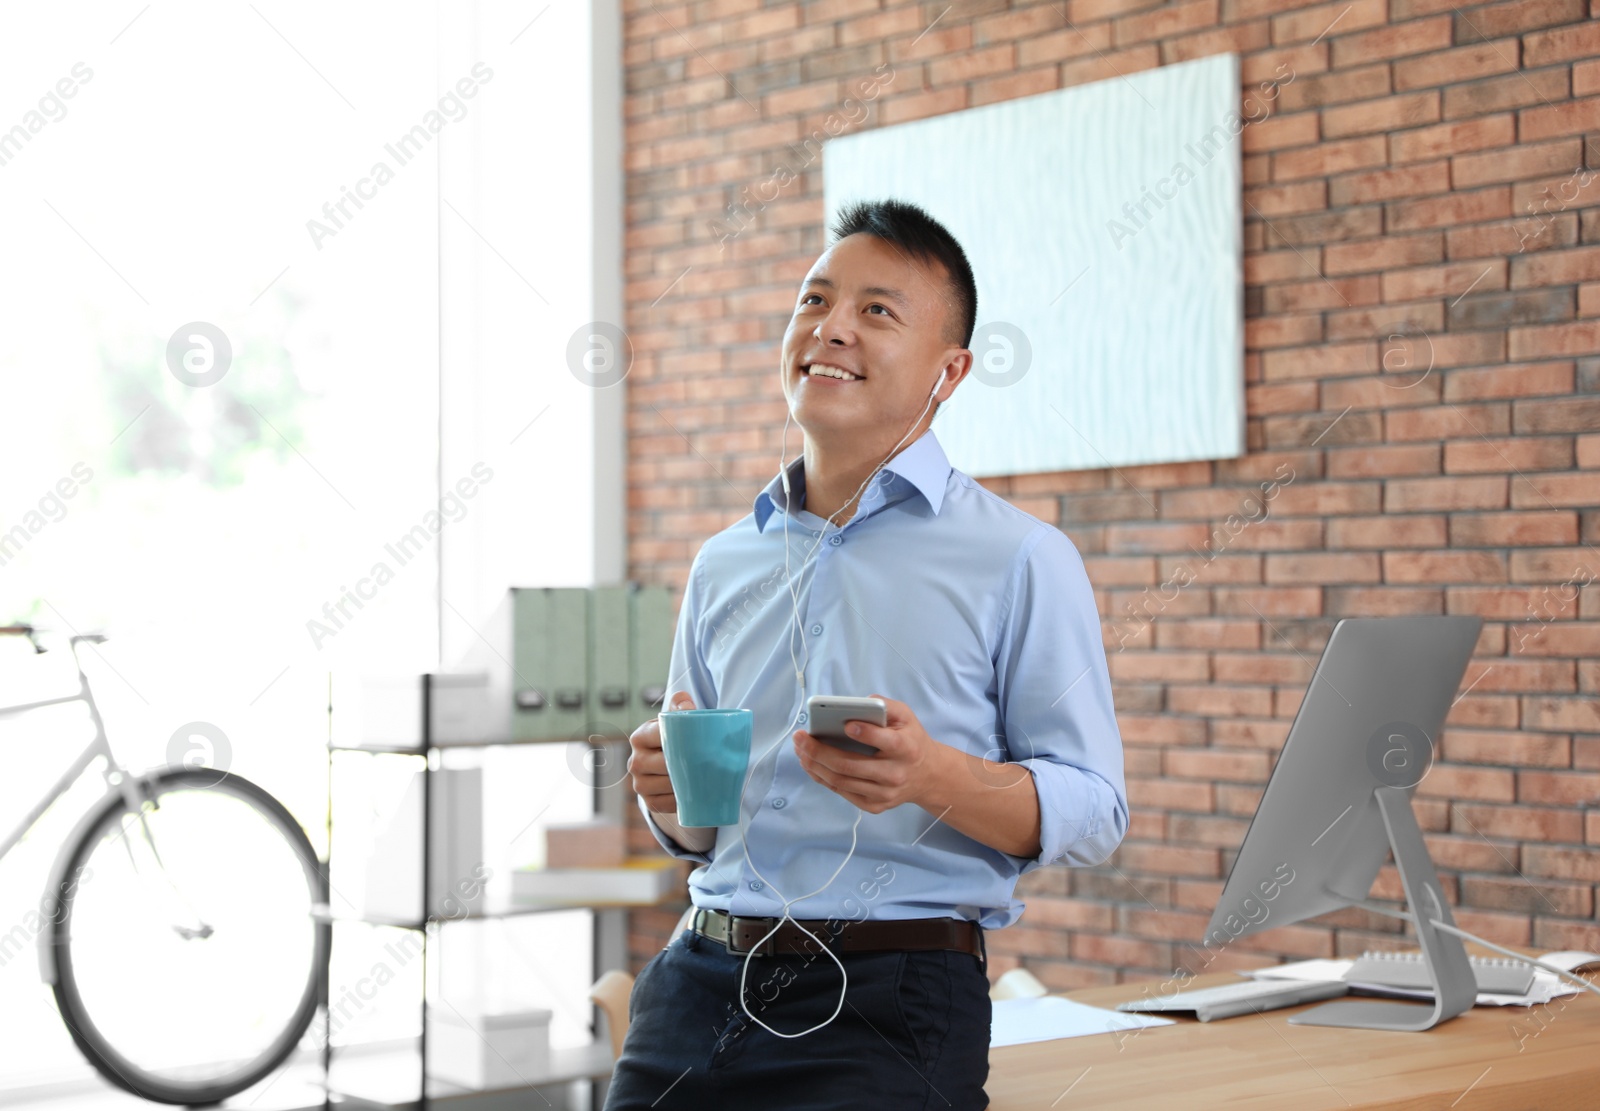 Photo of Happy young businessman with mobile phone listening to music in office. Peaceful moment